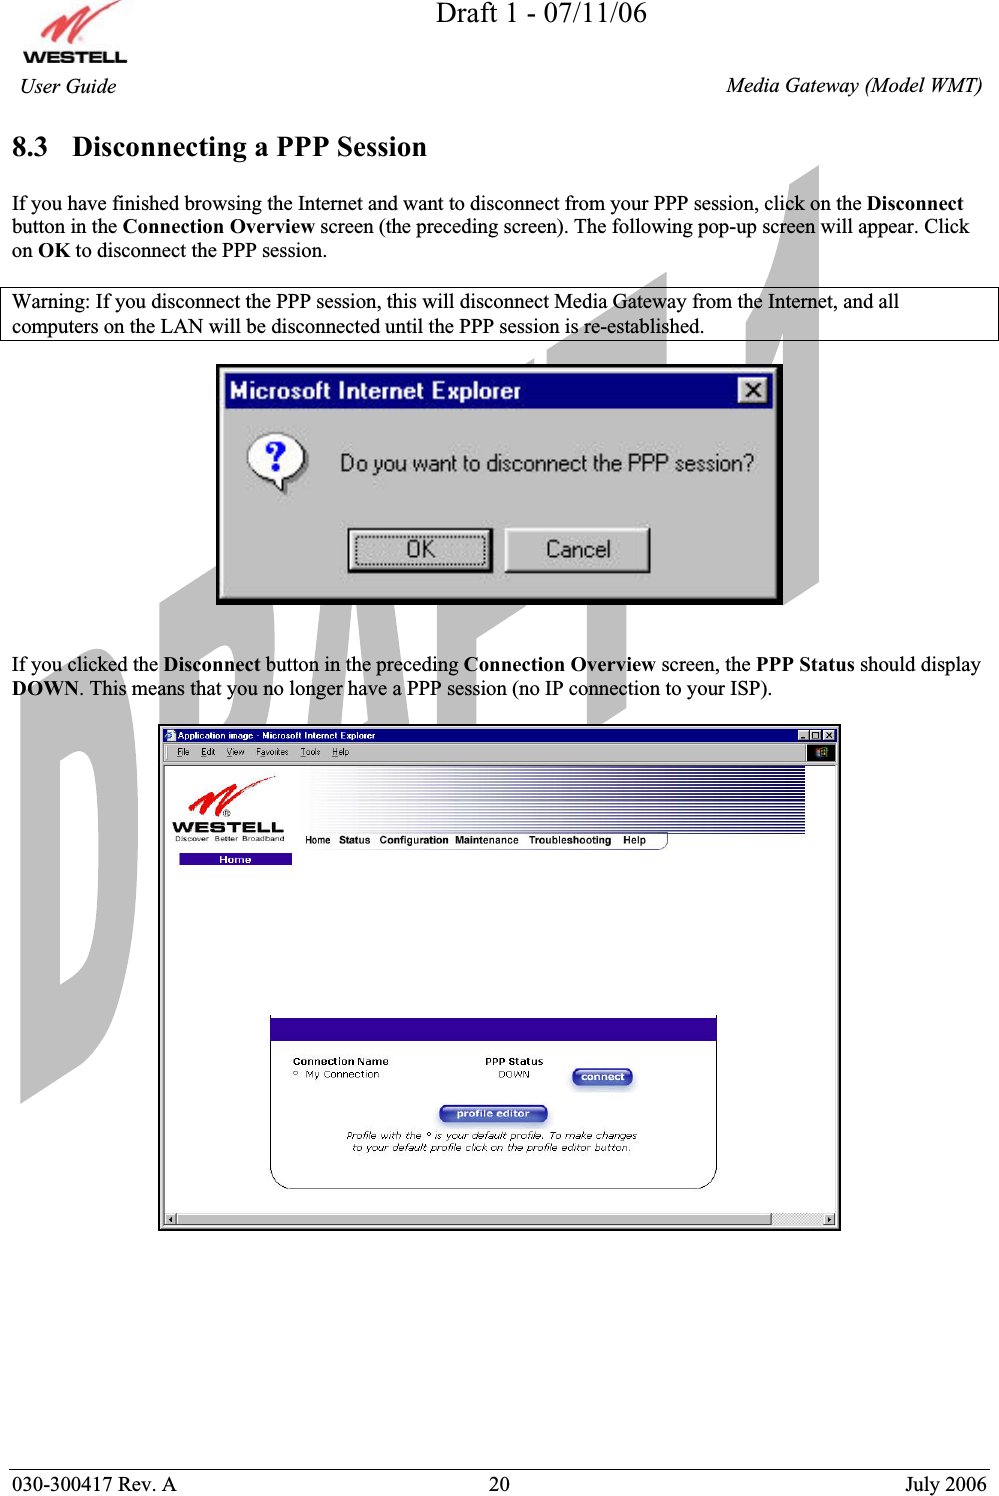 Draft 1 - 07/11/06030-300417 Rev. A  20  July 2006  Media Gateway (Model WMT) User Guide 8.3 Disconnecting a PPP Session If you have finished browsing the Internet and want to disconnect from your PPP session, click on the Disconnectbutton in the Connection Overview screen (the preceding screen). The following pop-up screen will appear. Click on OK to disconnect the PPP session. Warning: If you disconnect the PPP session, this will disconnect Media Gateway from the Internet, and all computers on the LAN will be disconnected until the PPP session is re-established. If you clicked the Disconnect button in the preceding Connection Overview screen, the PPP Status should display DOWN. This means that you no longer have a PPP session (no IP connection to your ISP).  